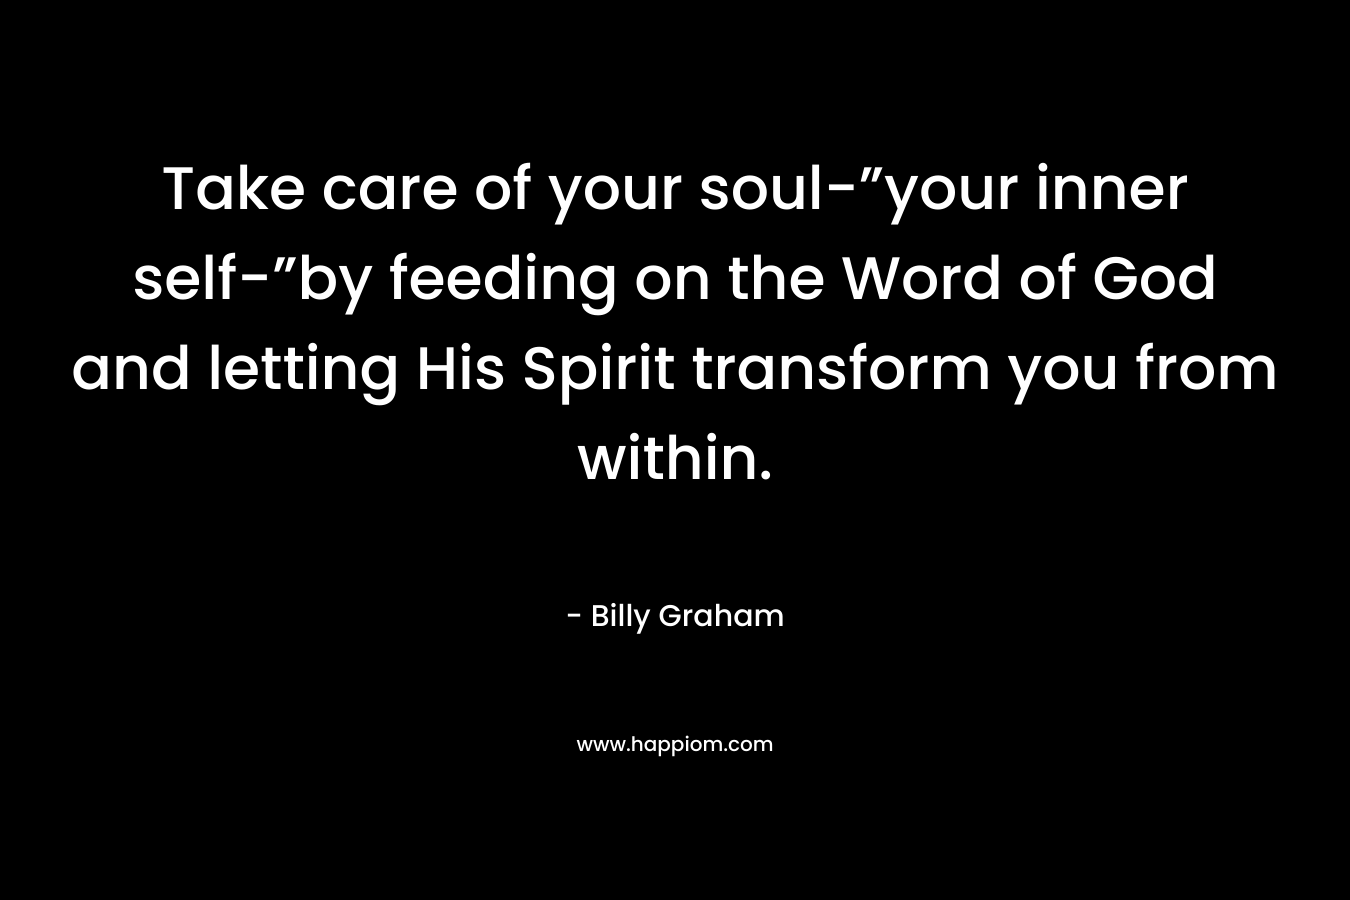 Take care of your soul-”your inner self-”by feeding on the Word of God and letting His Spirit transform you from within. – Billy Graham